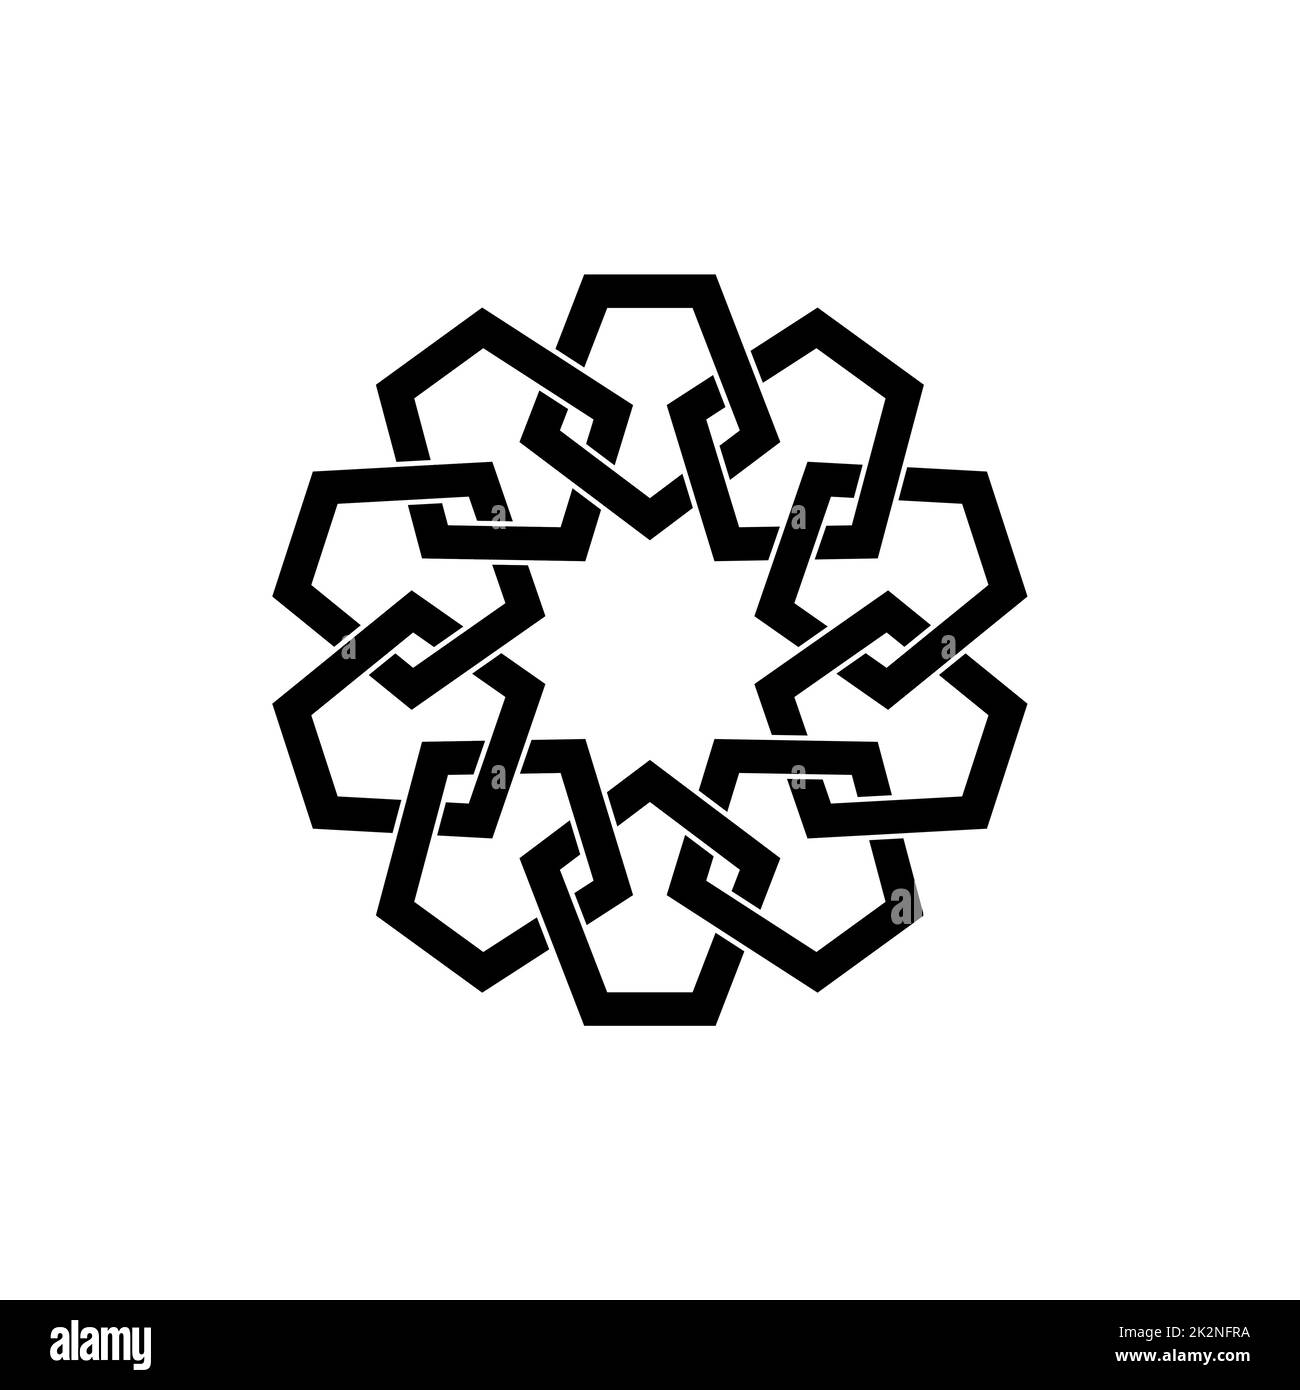 Geometric emblem template design with overlapping elements. Islamic motif. Geometric pattern mandala in Arabic style, black logo isolated on a white Stock Vector